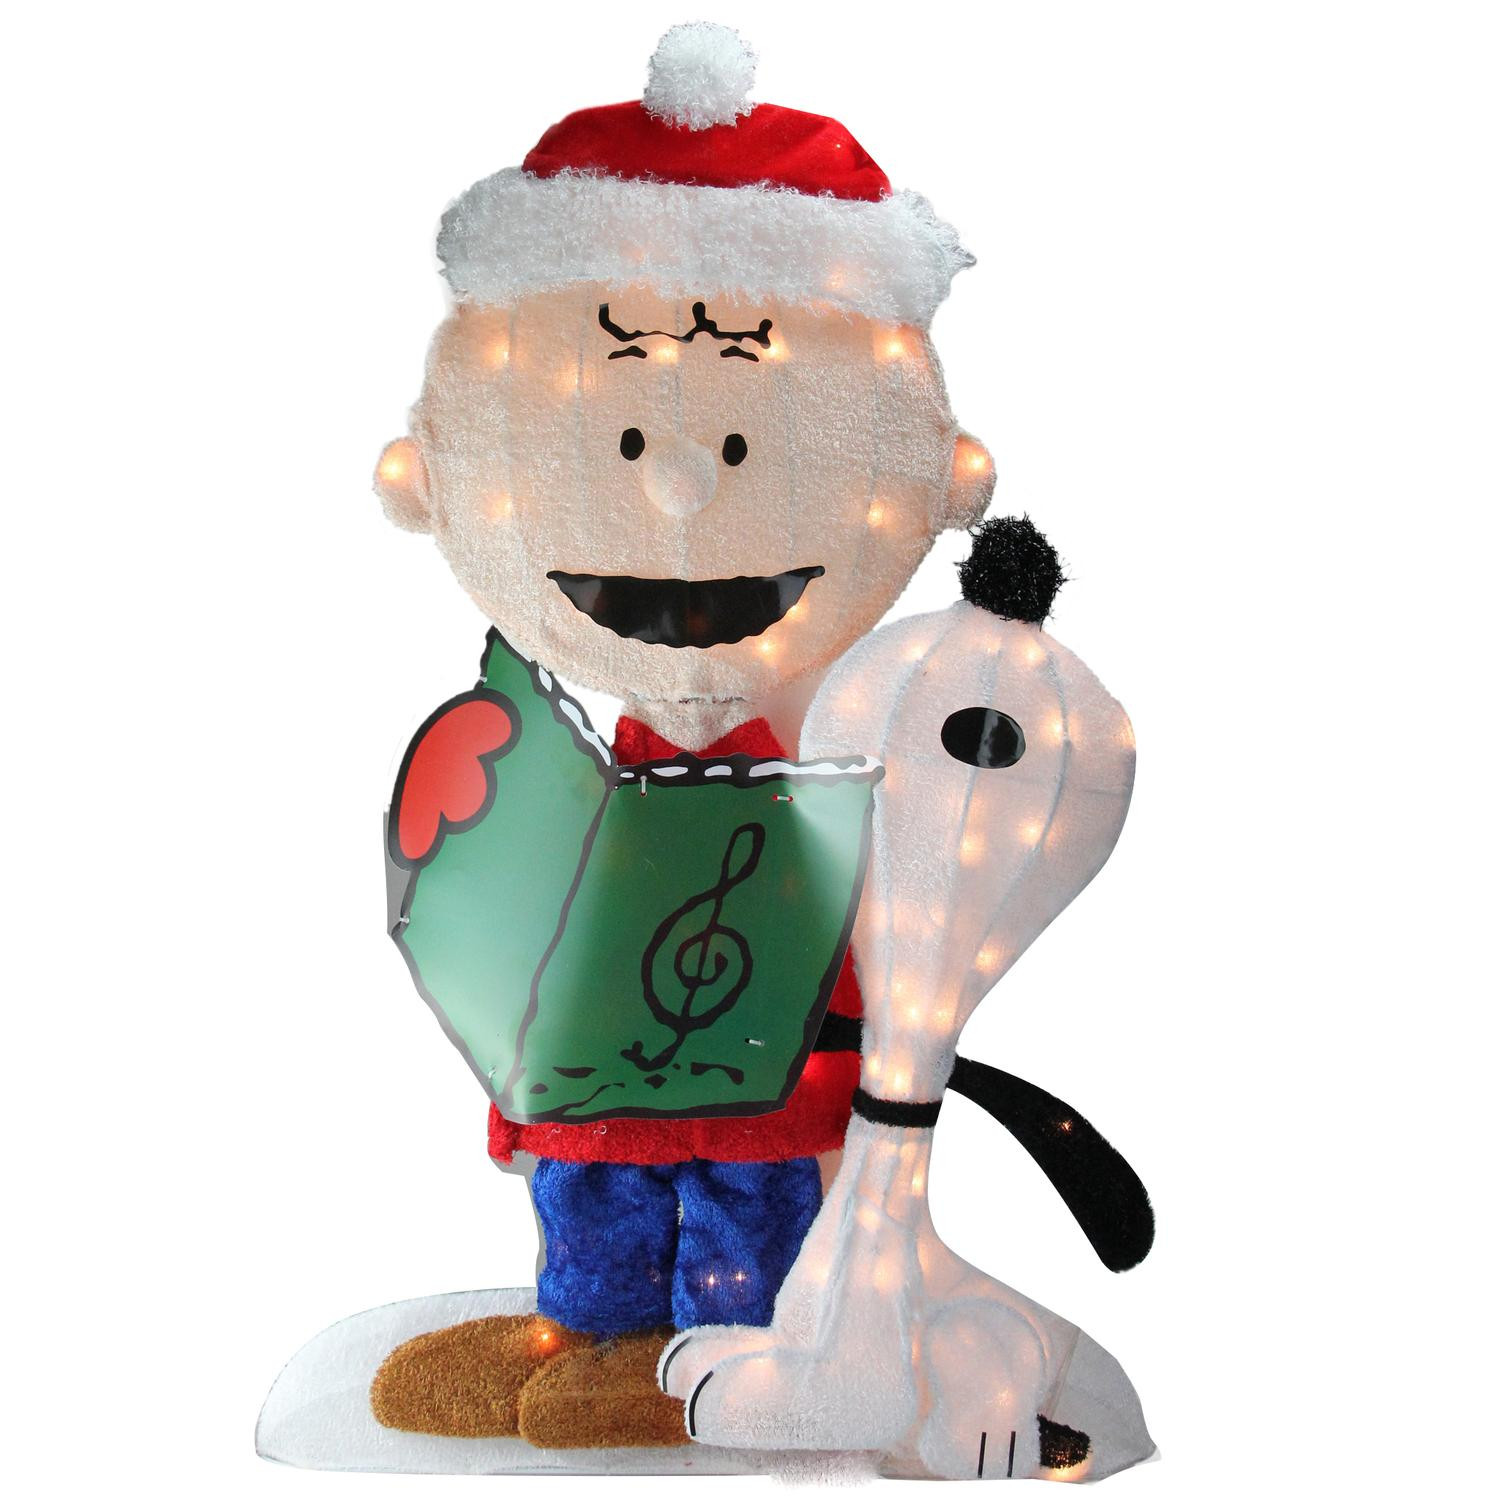 Peanuts Outdoor Christmas Decorations
 32” Pre Lit Peanuts Charlie and Snoopy 2 D Christmas